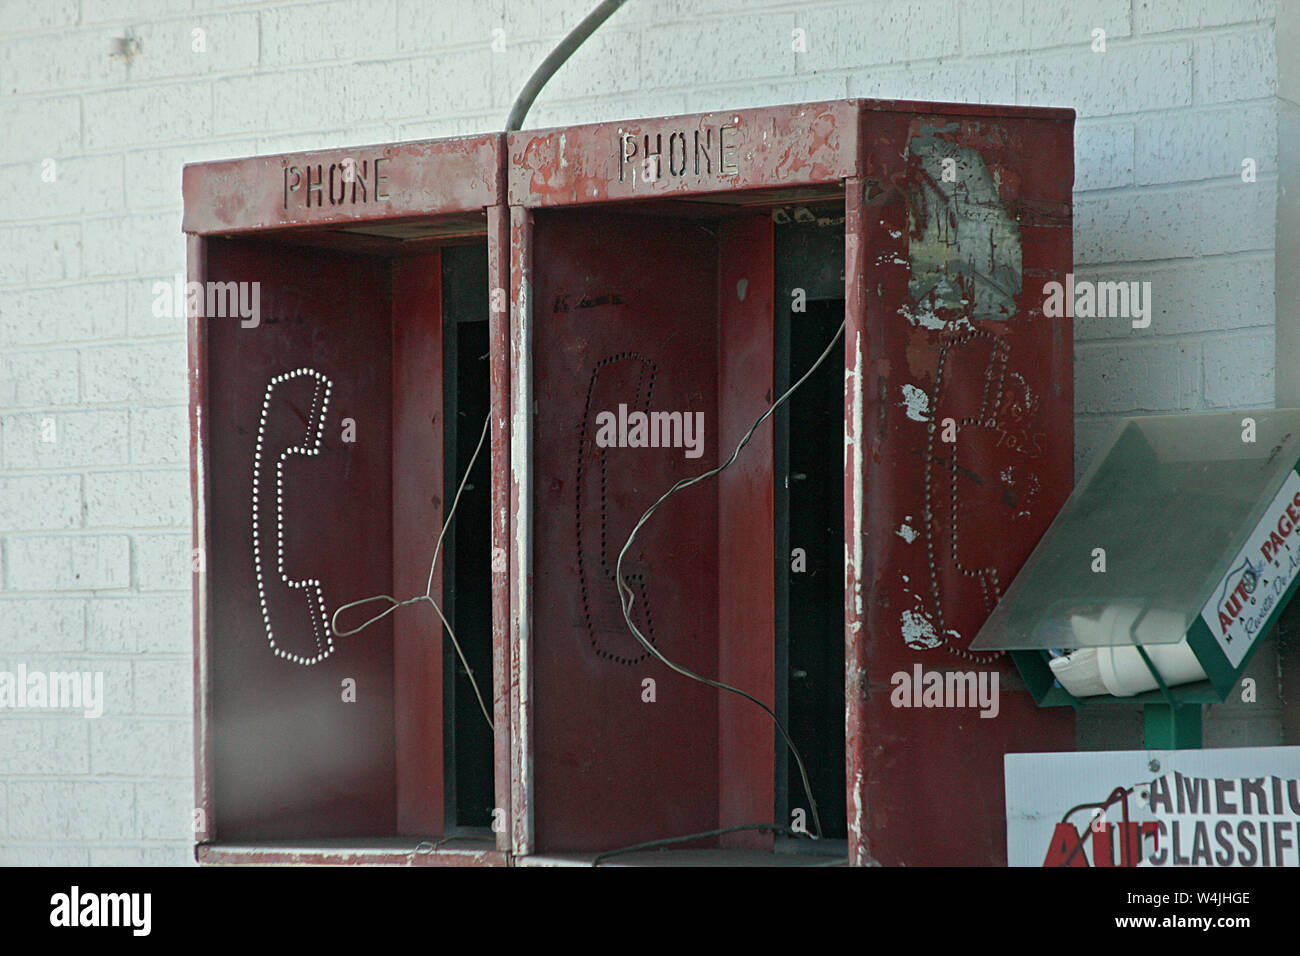 Out of use public pay phone boxes by gas station in the United States Stock Photo